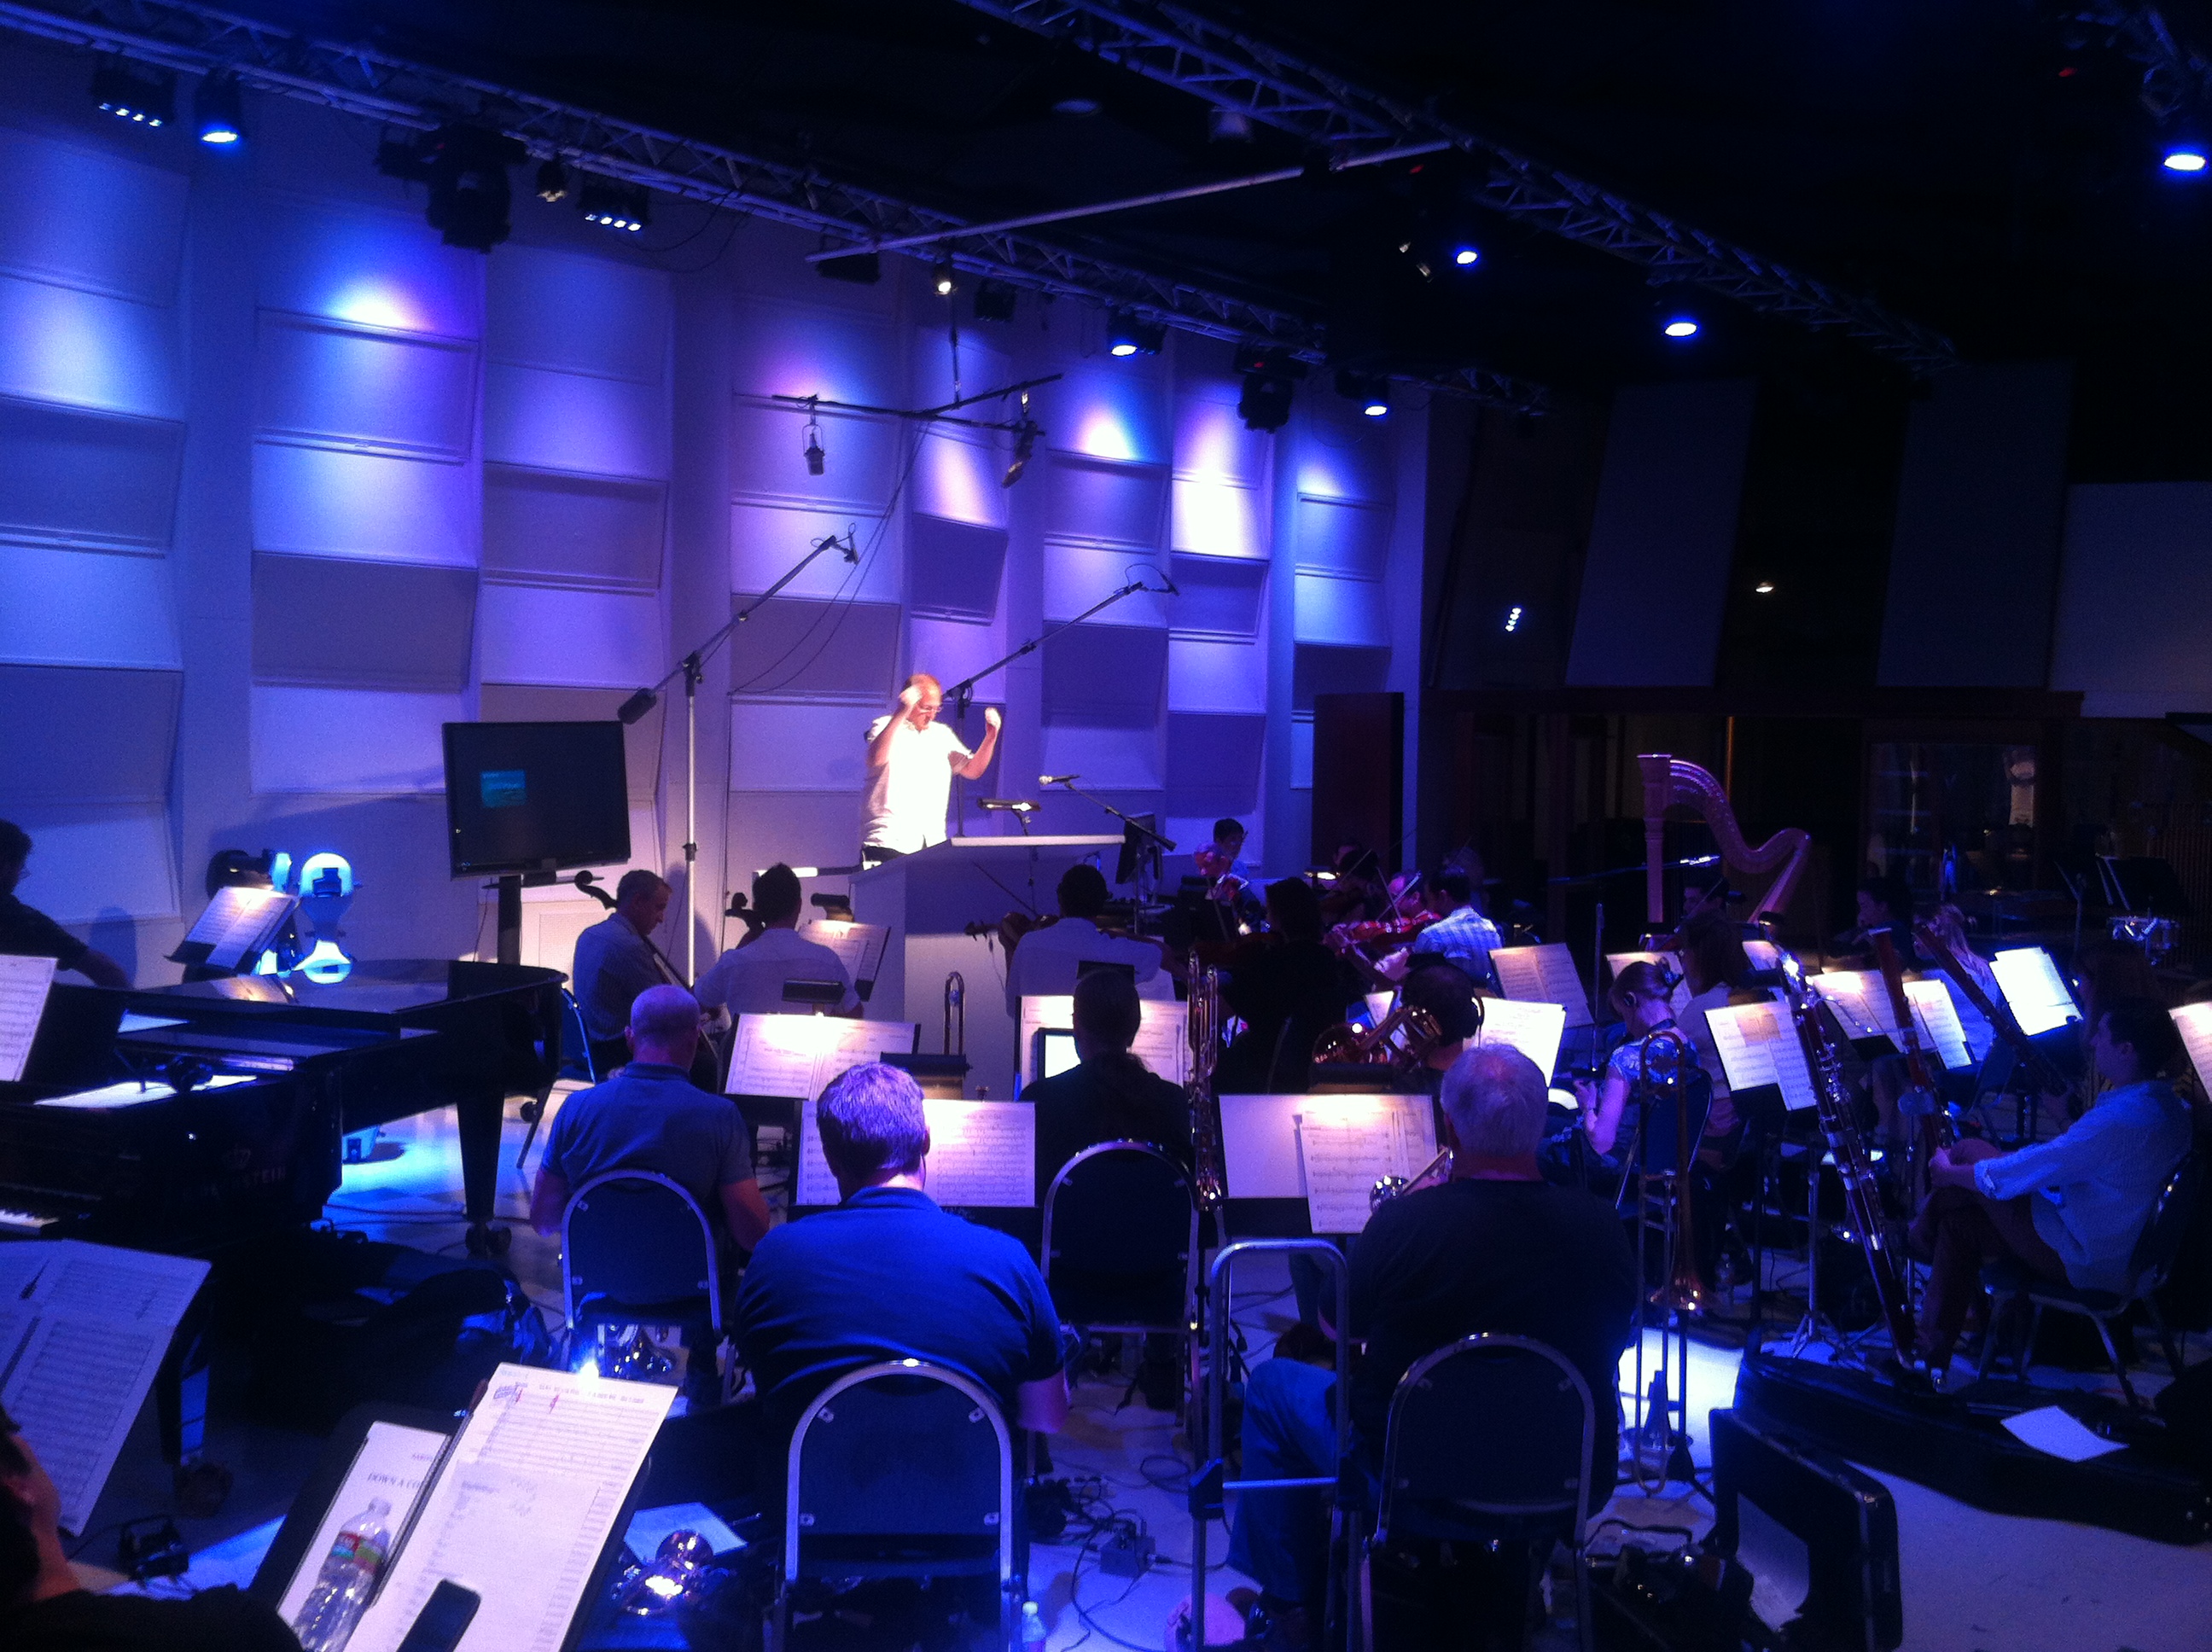 Composer Kerry Muzzey at the podium, EastWest Studios in Hollywood, CA.